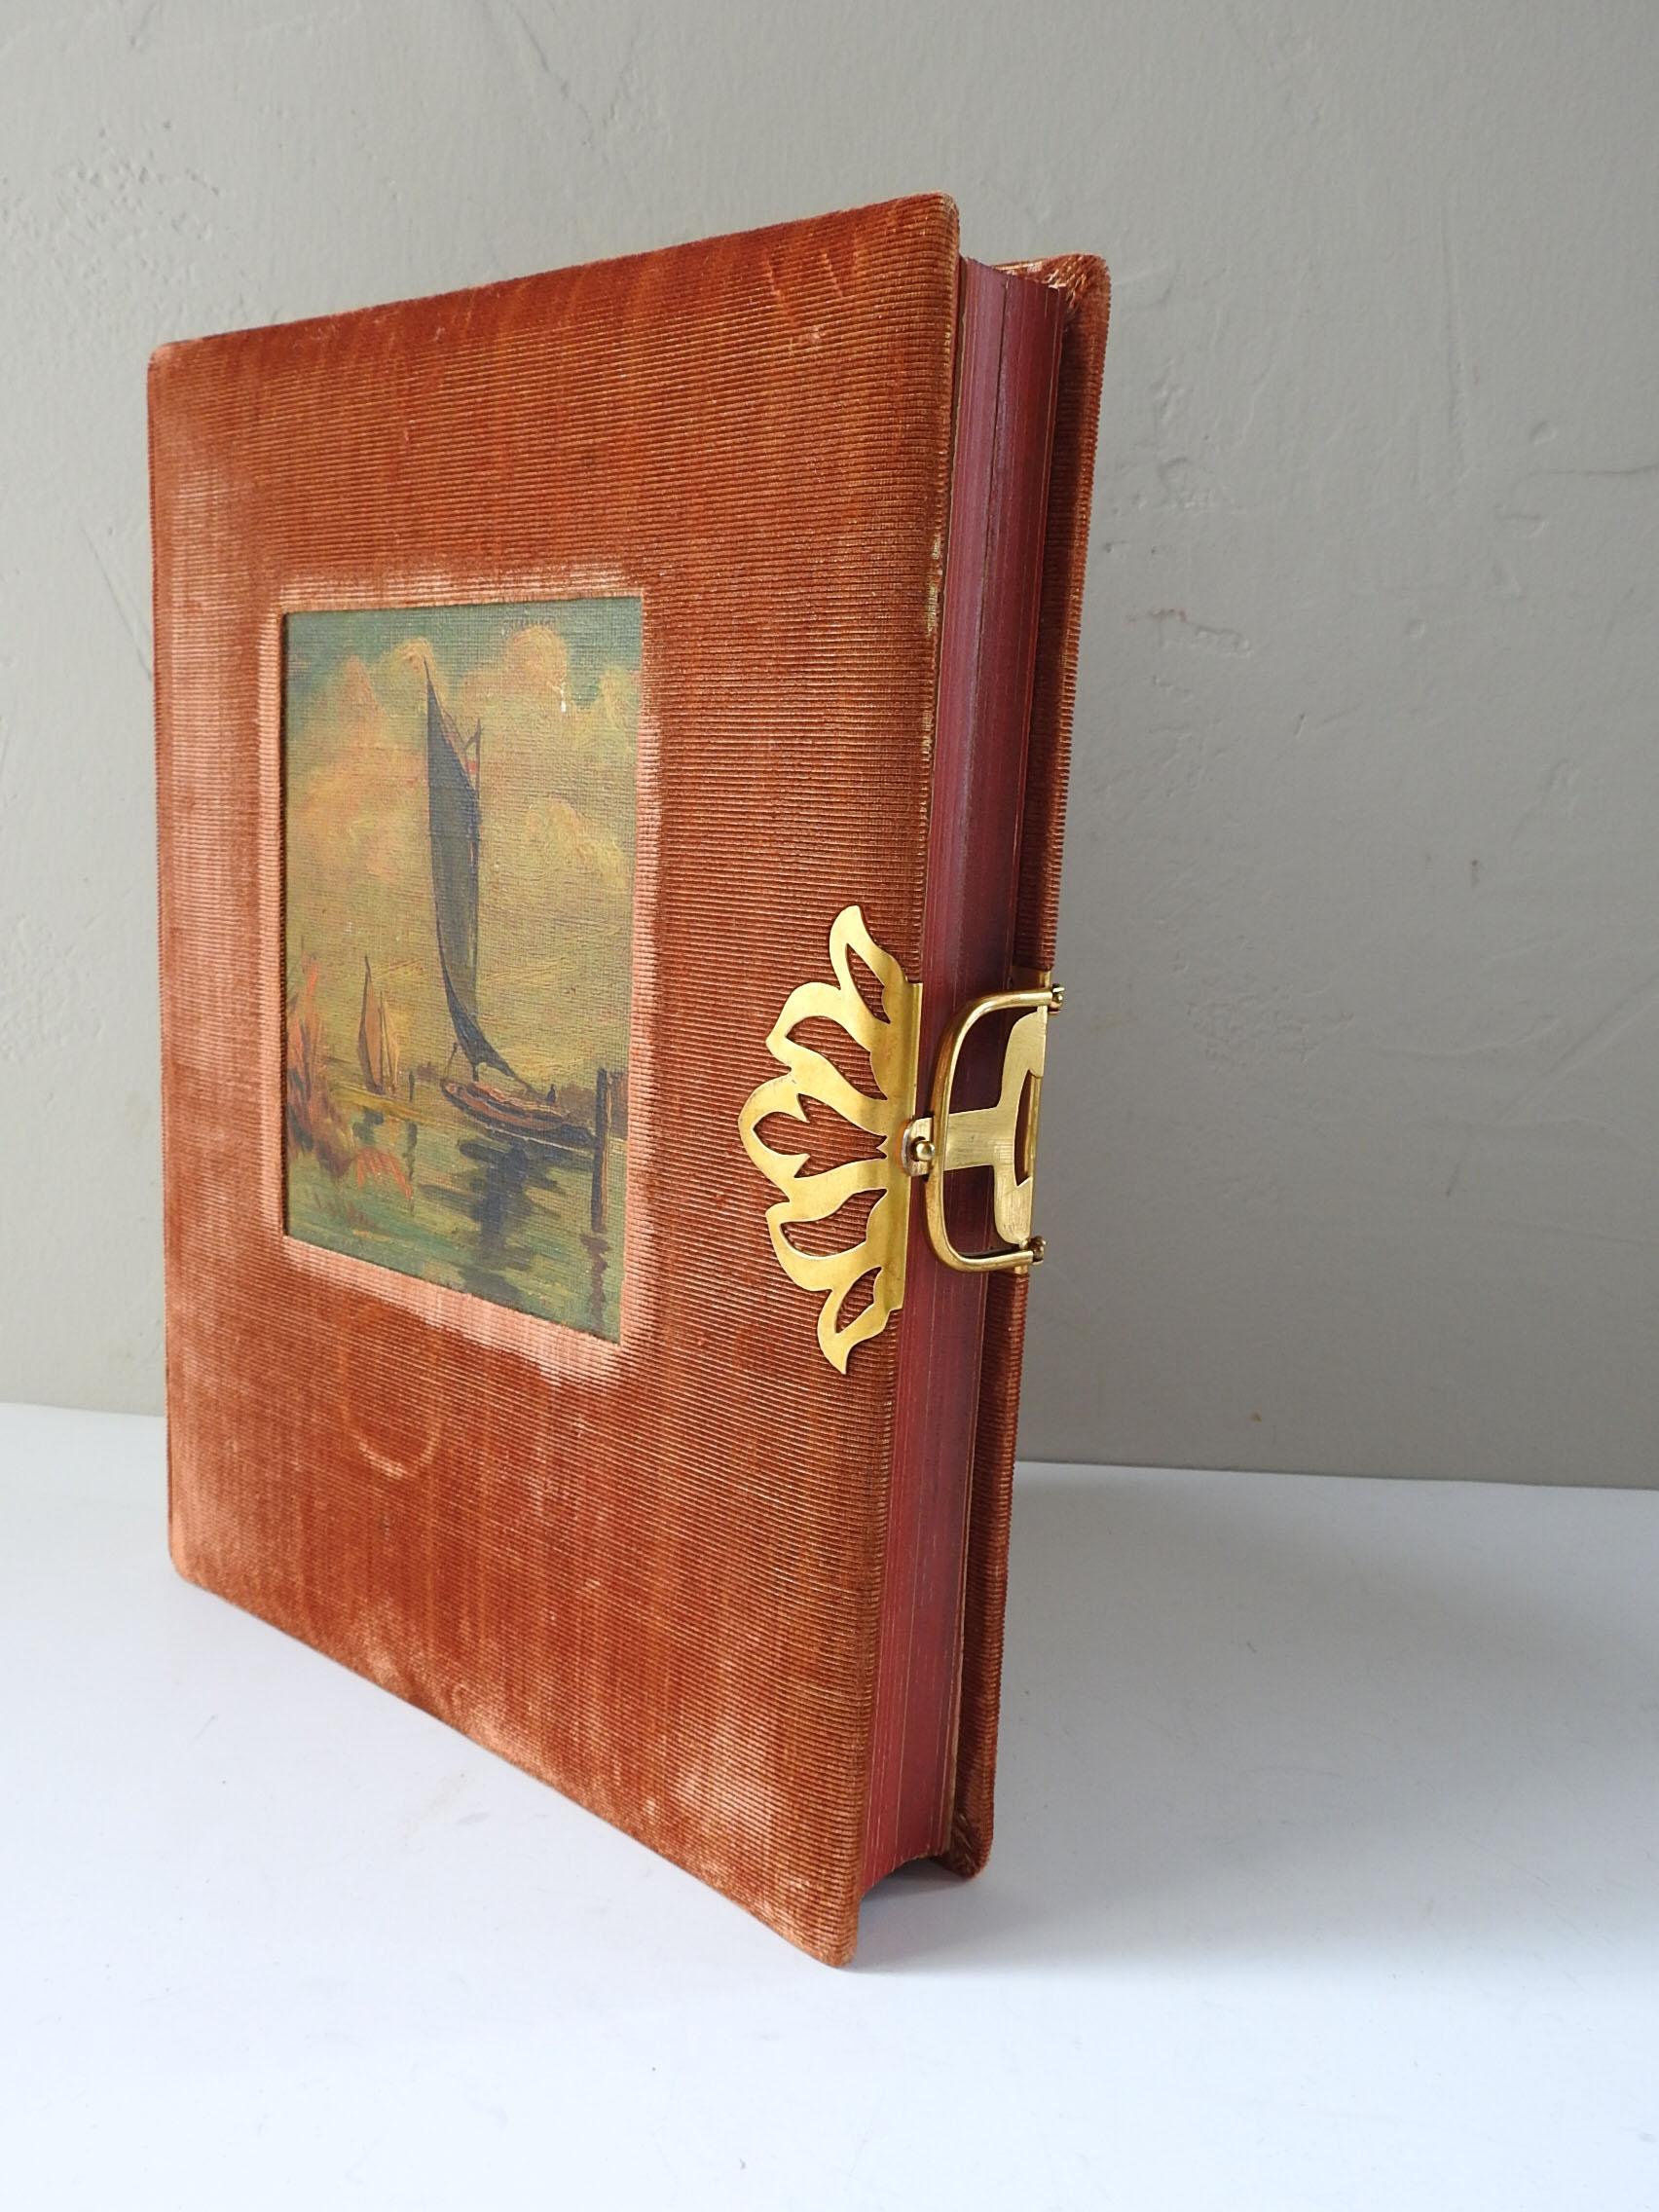 Japanese Antique Velvet Album With Sailboat Painting Cover